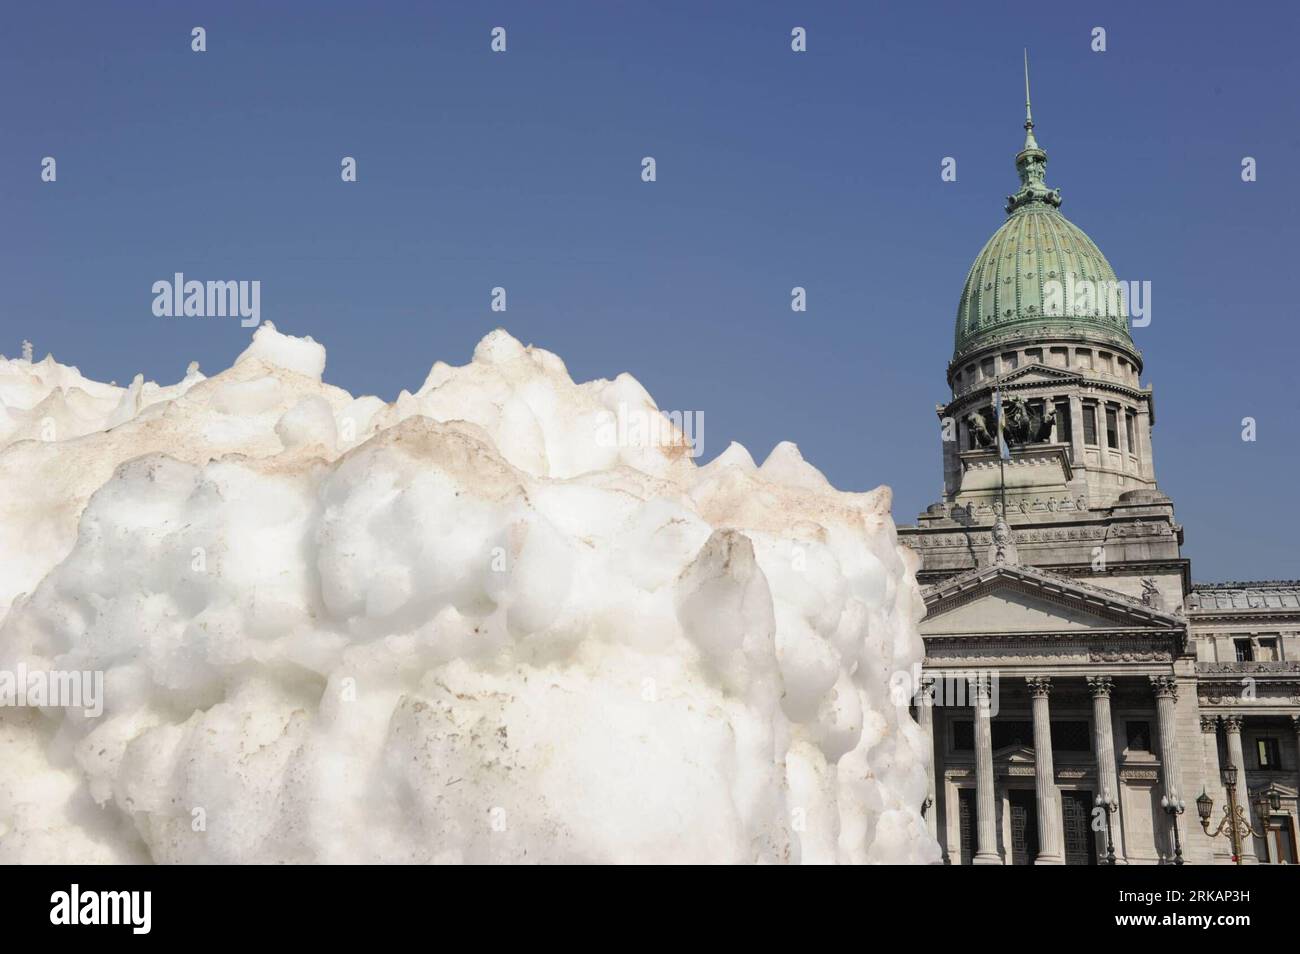 Bildnummer: 54410921  Datum: 07.09.2010  Copyright: imago/Xinhua (100908) -- BUENOS AIRES, Sept. 8, 2010 (Xinhua) -- A huge ice block is placed in front of the Parliamentary Building in Buenos Aires, Argentina, Sept. 7, 2010. The ice block was set by Green Peace to protest against the parliment s slow progress on passing the law of the protection of glacier. (Xinhua/Martin Katz) (lyx) ARGENTINA-BUENOS AIRES-GREEN PEACE-PROTEST PUBLICATIONxNOTxINxCHN Politik Proteste kbdig xkg 2010 quer o0 Schnee Eis Erderwärmung Klimawandel  Demo Greenpeace    Bildnummer 54410921 Date 07 09 2010 Copyright Imag Stock Photo